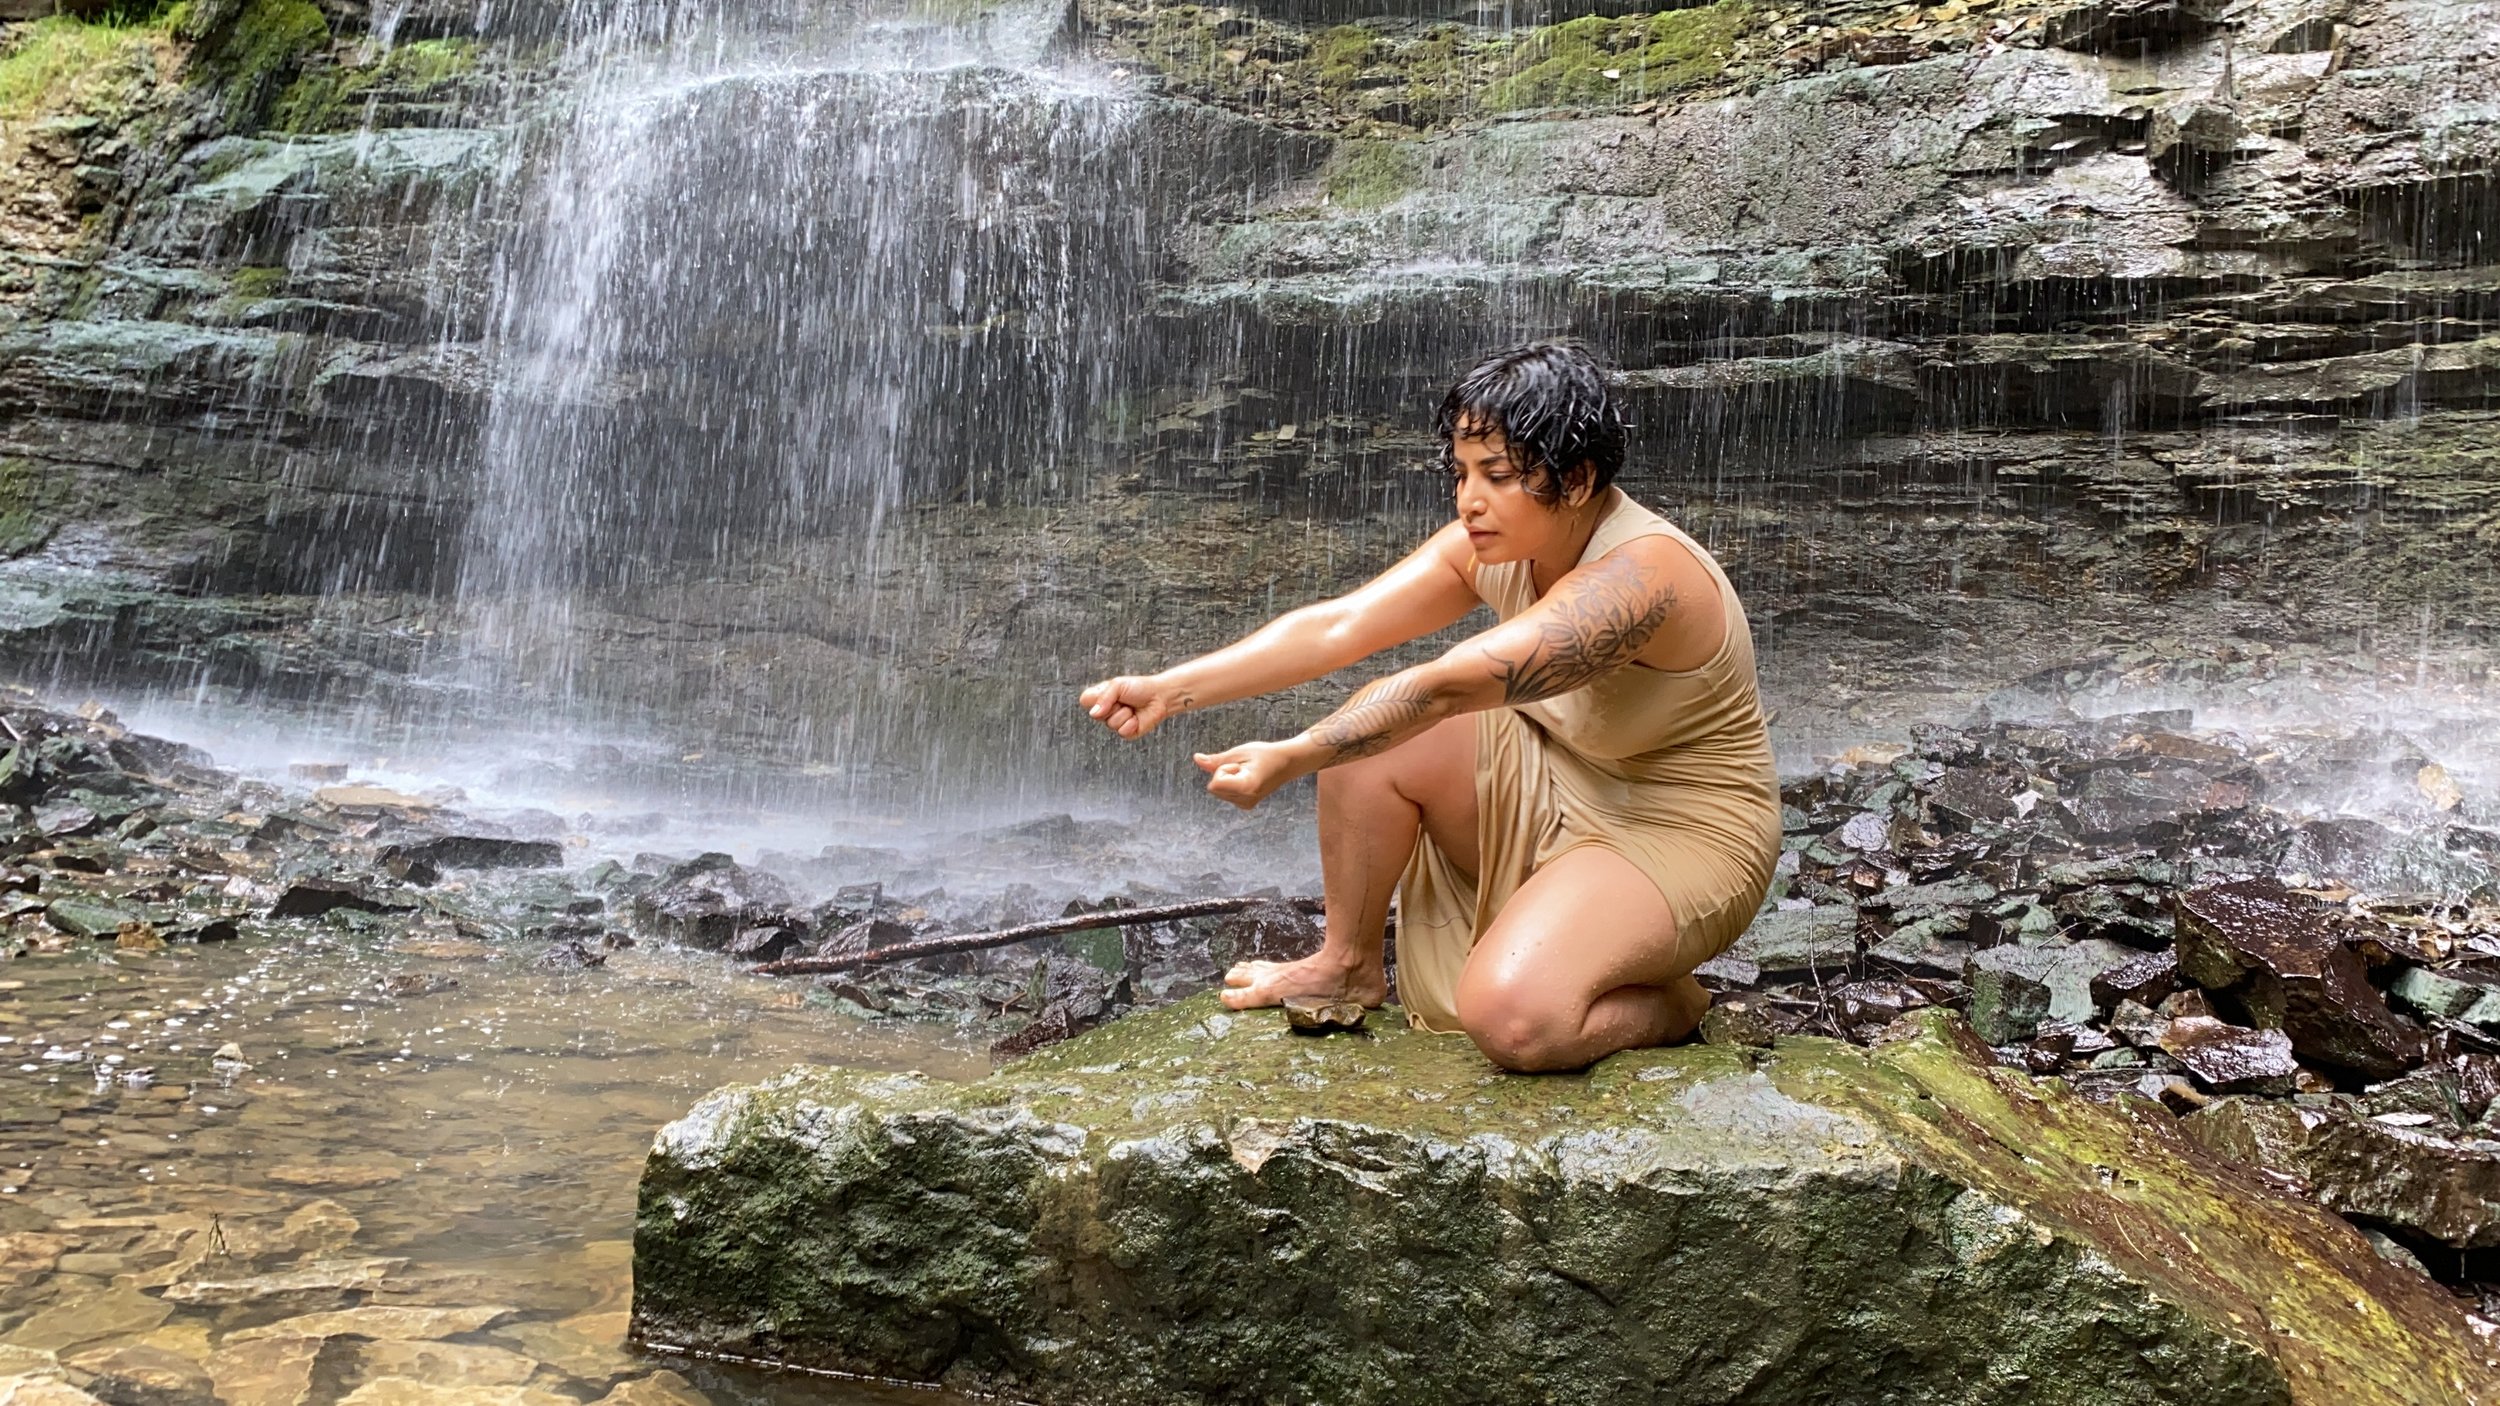 Woman kneeled on a rock in front of a small waterfall